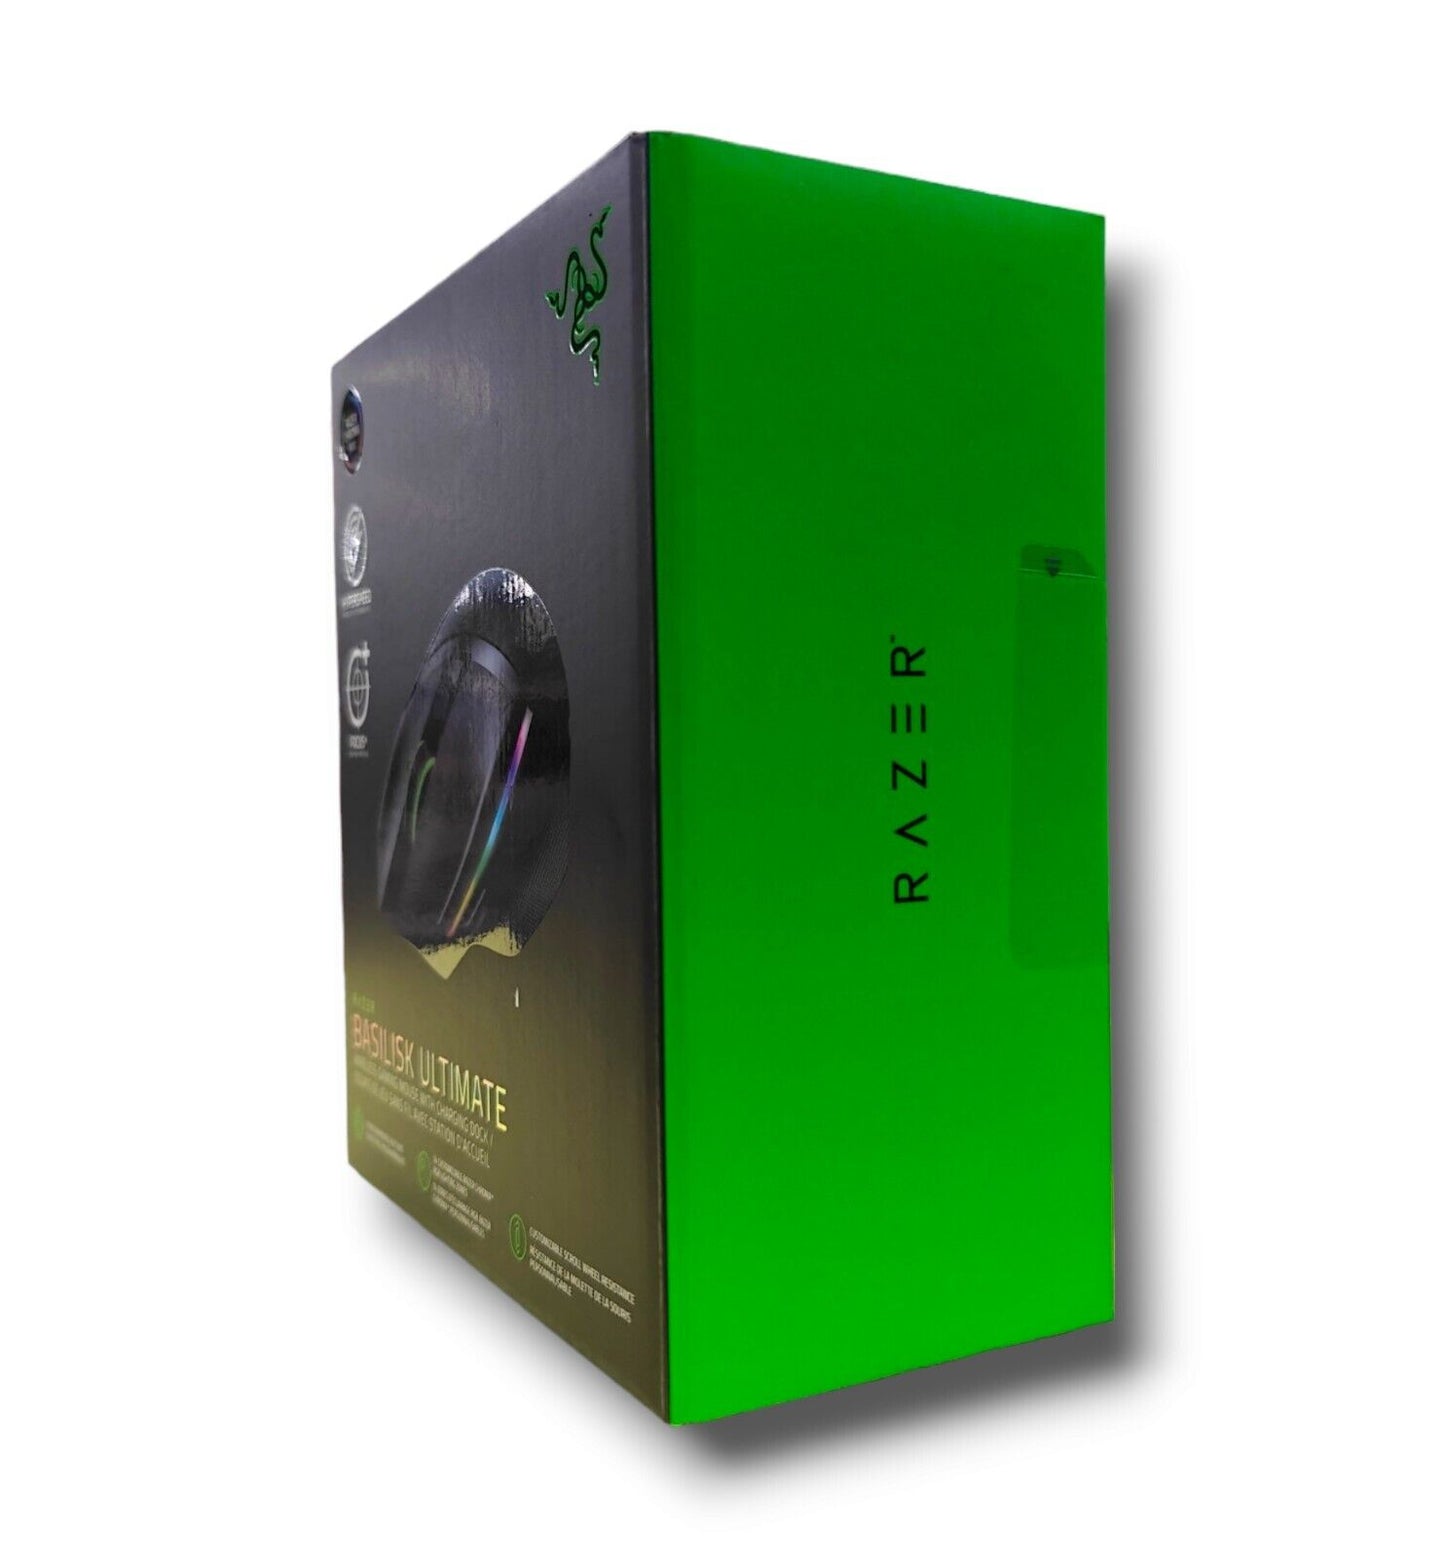 Razer - Basilisk Ultimate Wireless Optical with HyperSpeed Technology and Charging Dock Gaming Mouse - Black - Ricky's Garage